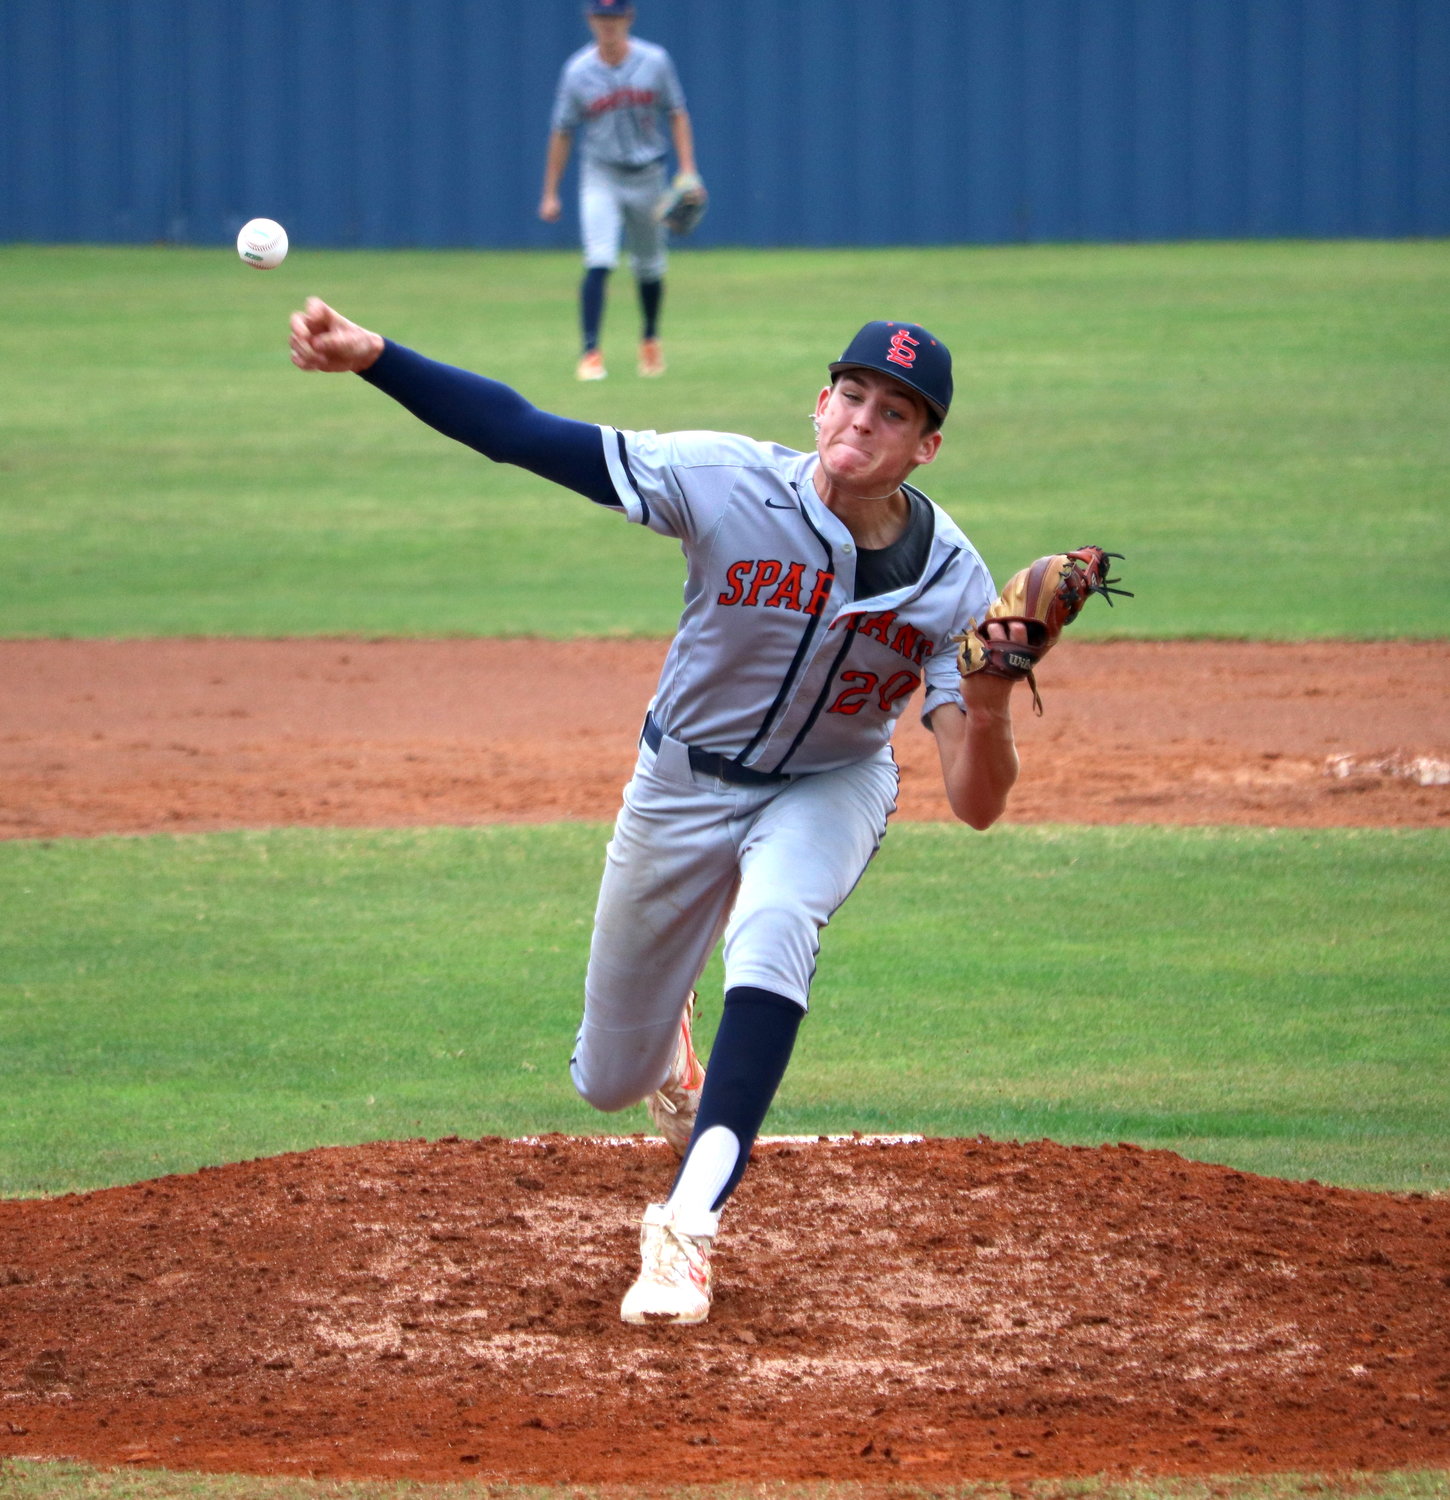 Nathan Johnson ptiches during Thursday's game between Taylor and Seven Lakes at the Taylor baseball field.